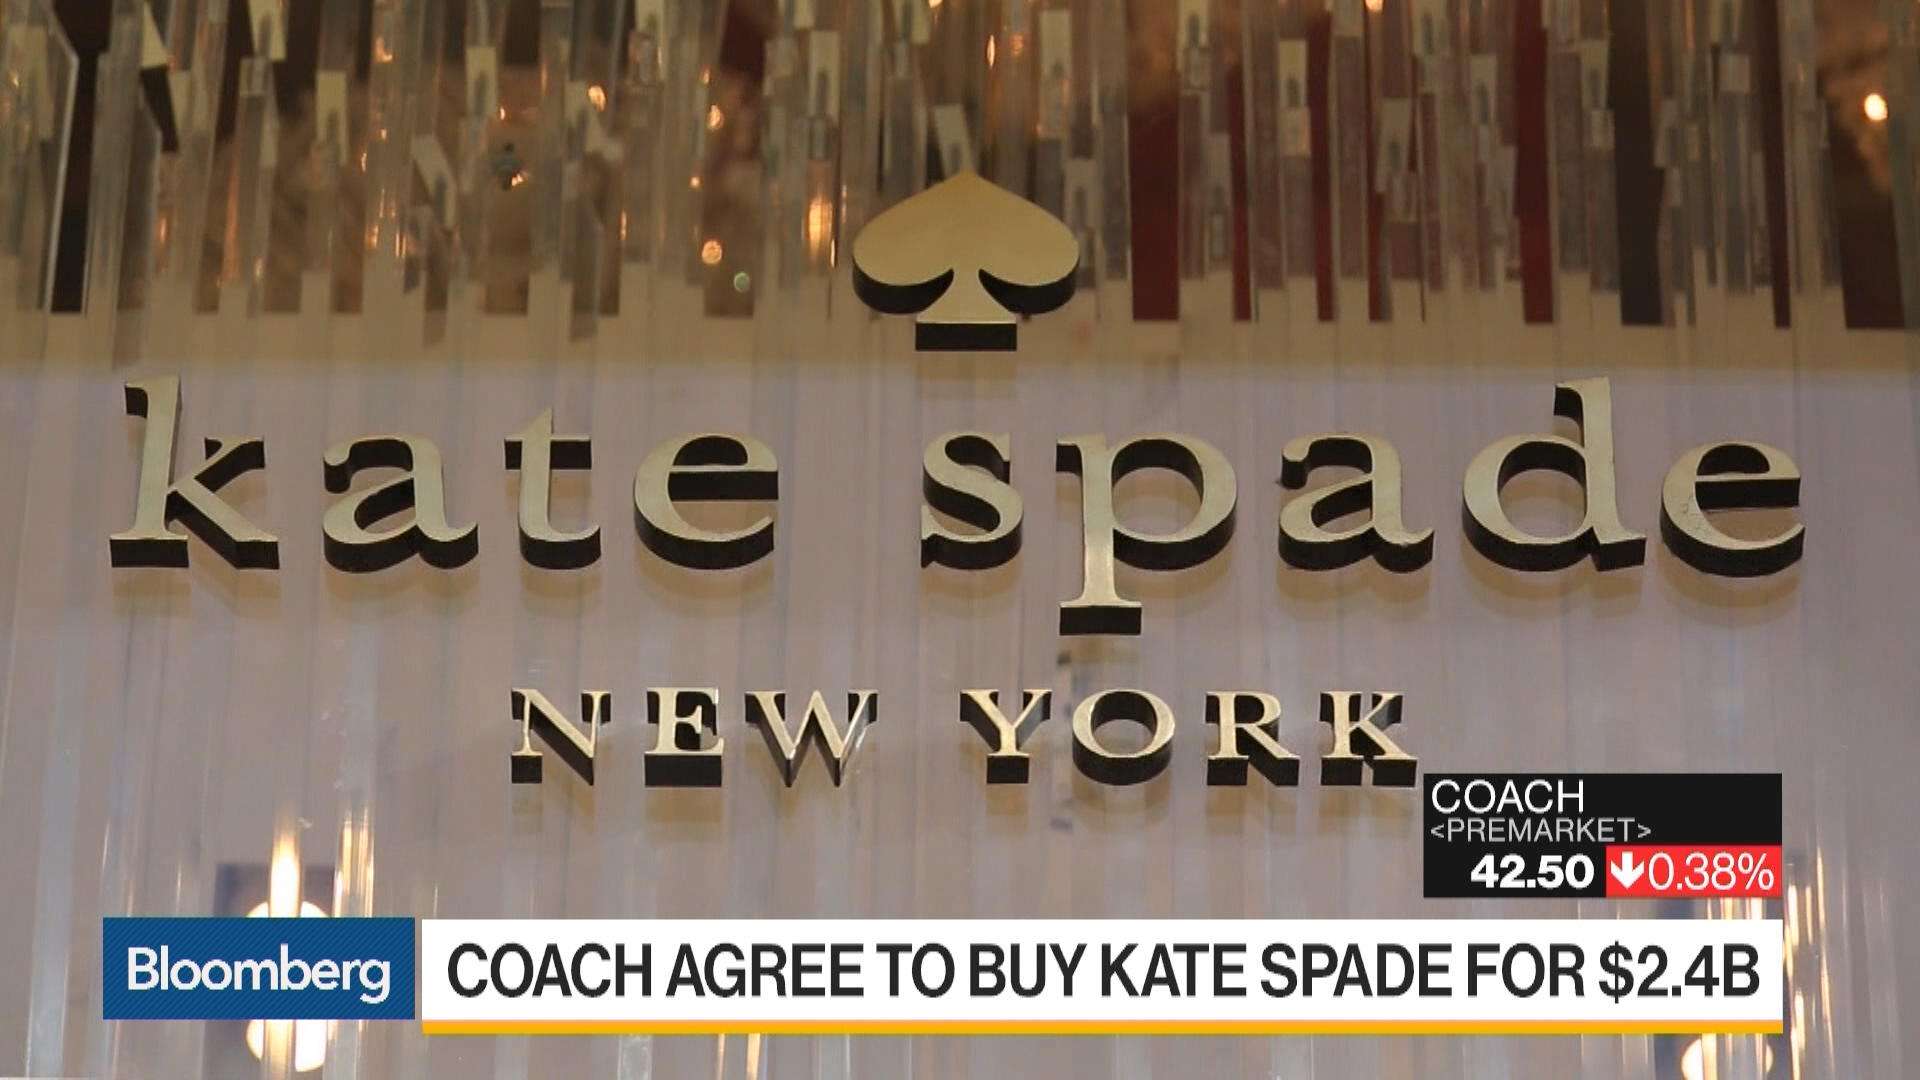 Coach Agrees to Buy Kate Spade for $ Billion - Bloomberg